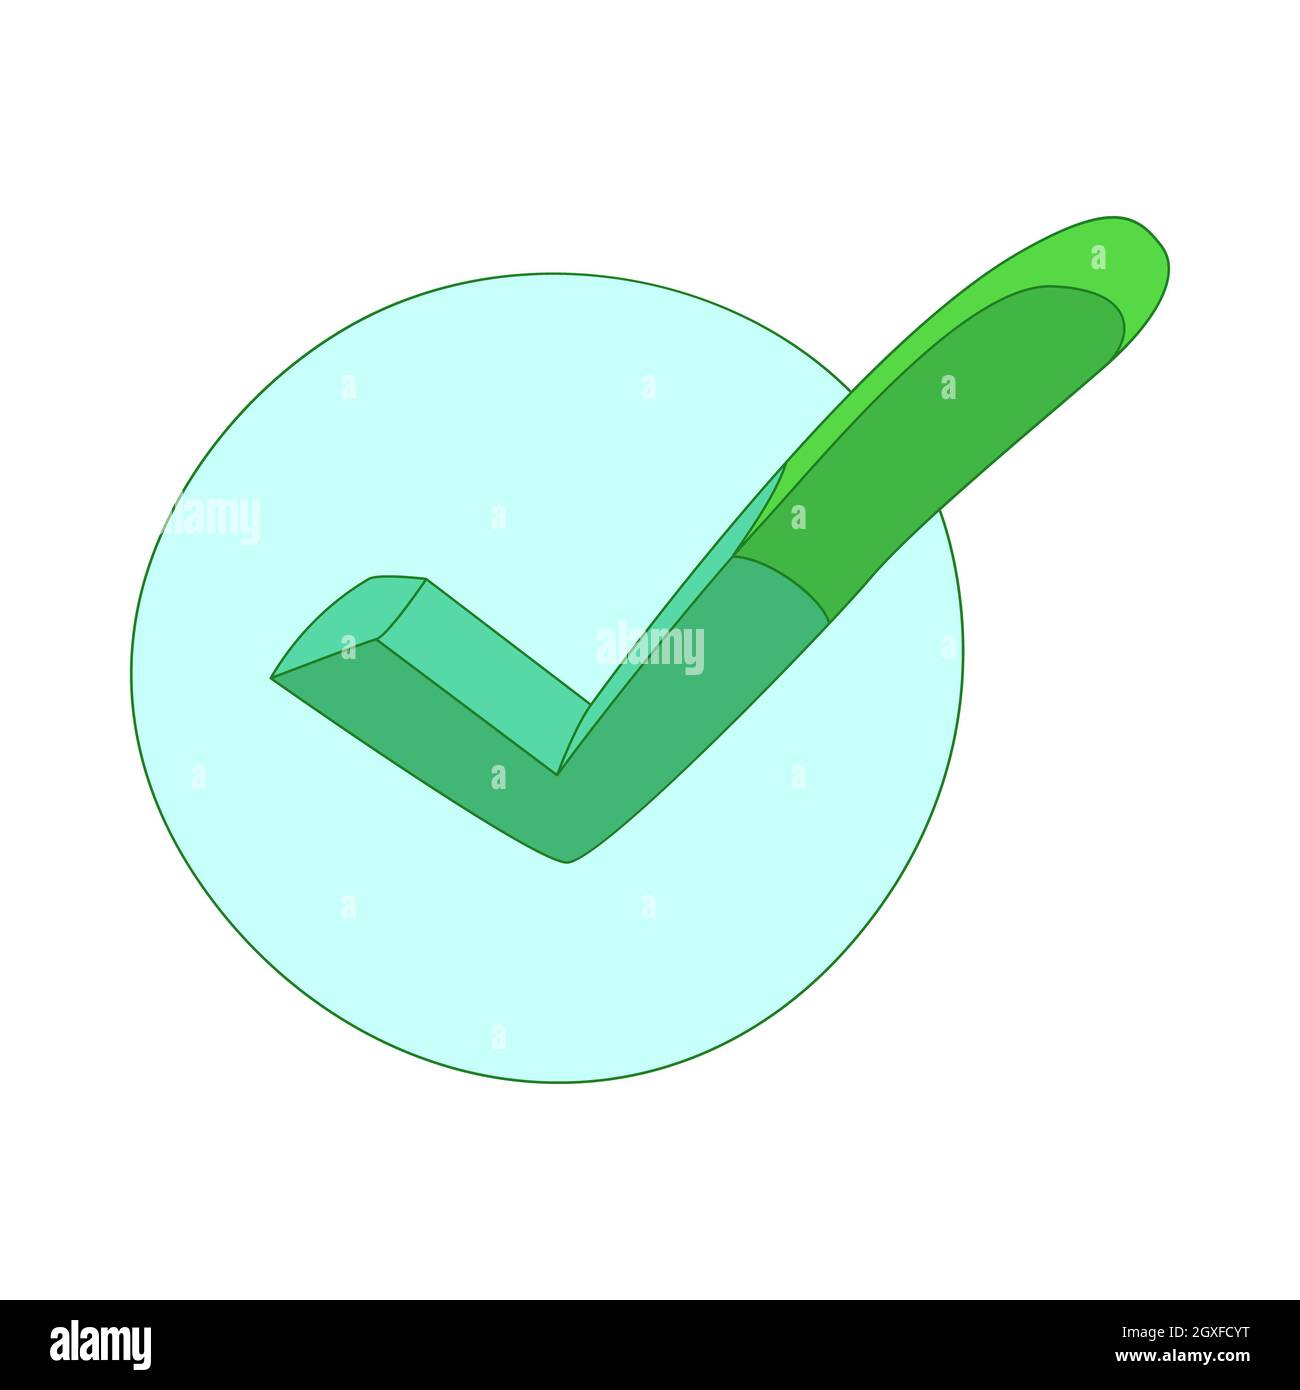 Hand drawn green tick icon in cartoon style isolated on white background Stock Photo